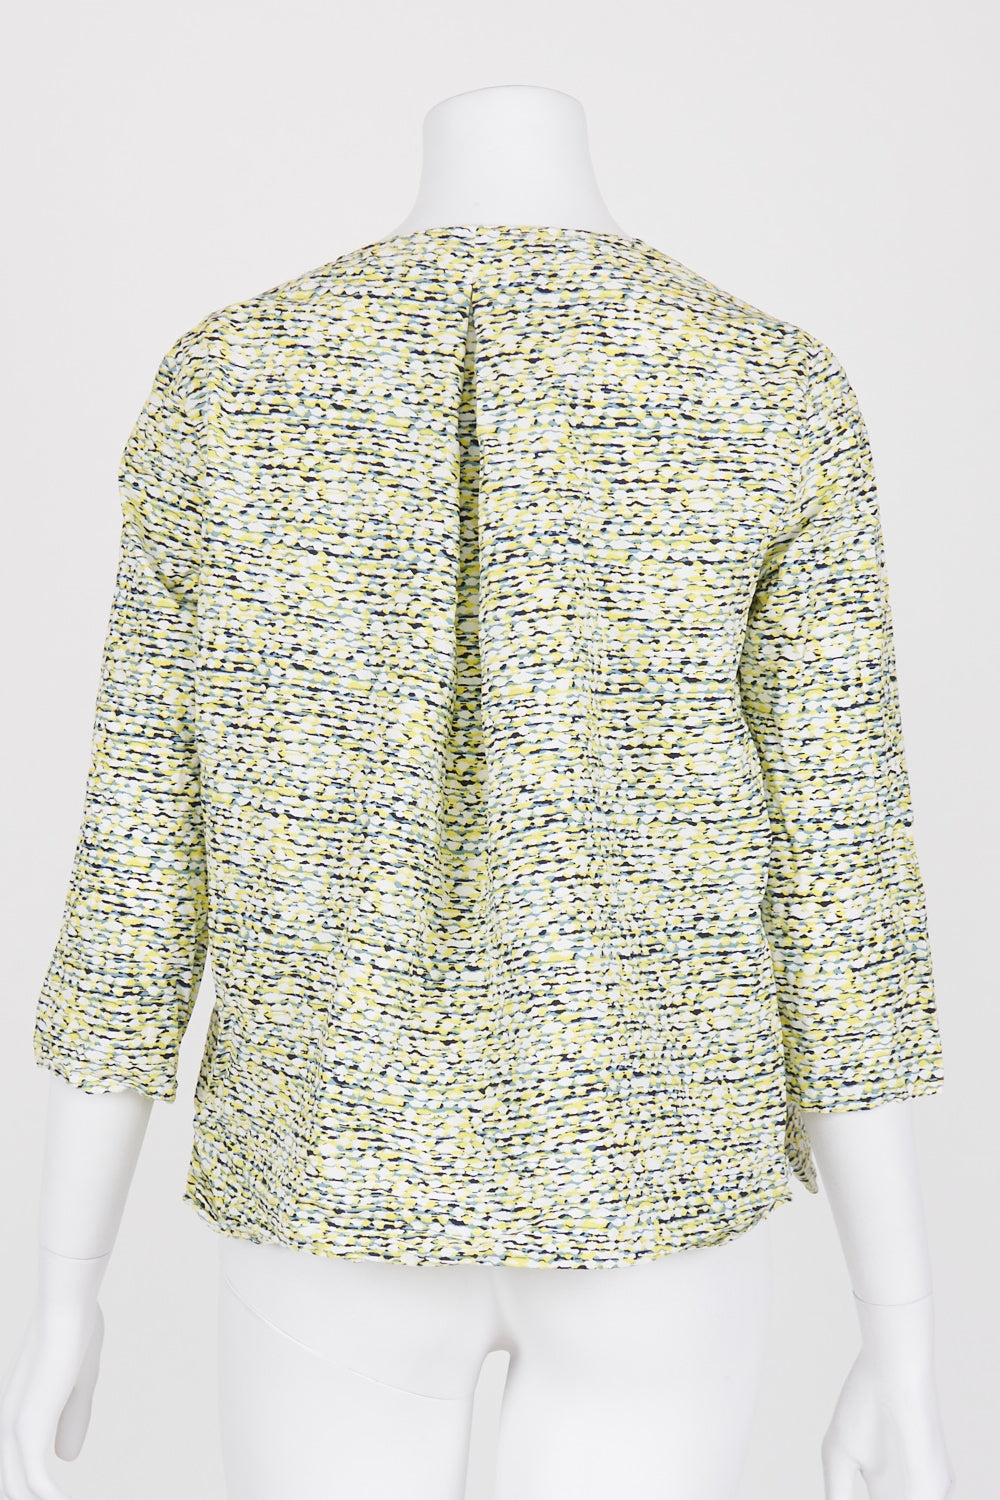 COS Yellow Patterned Button Down Shirt 8